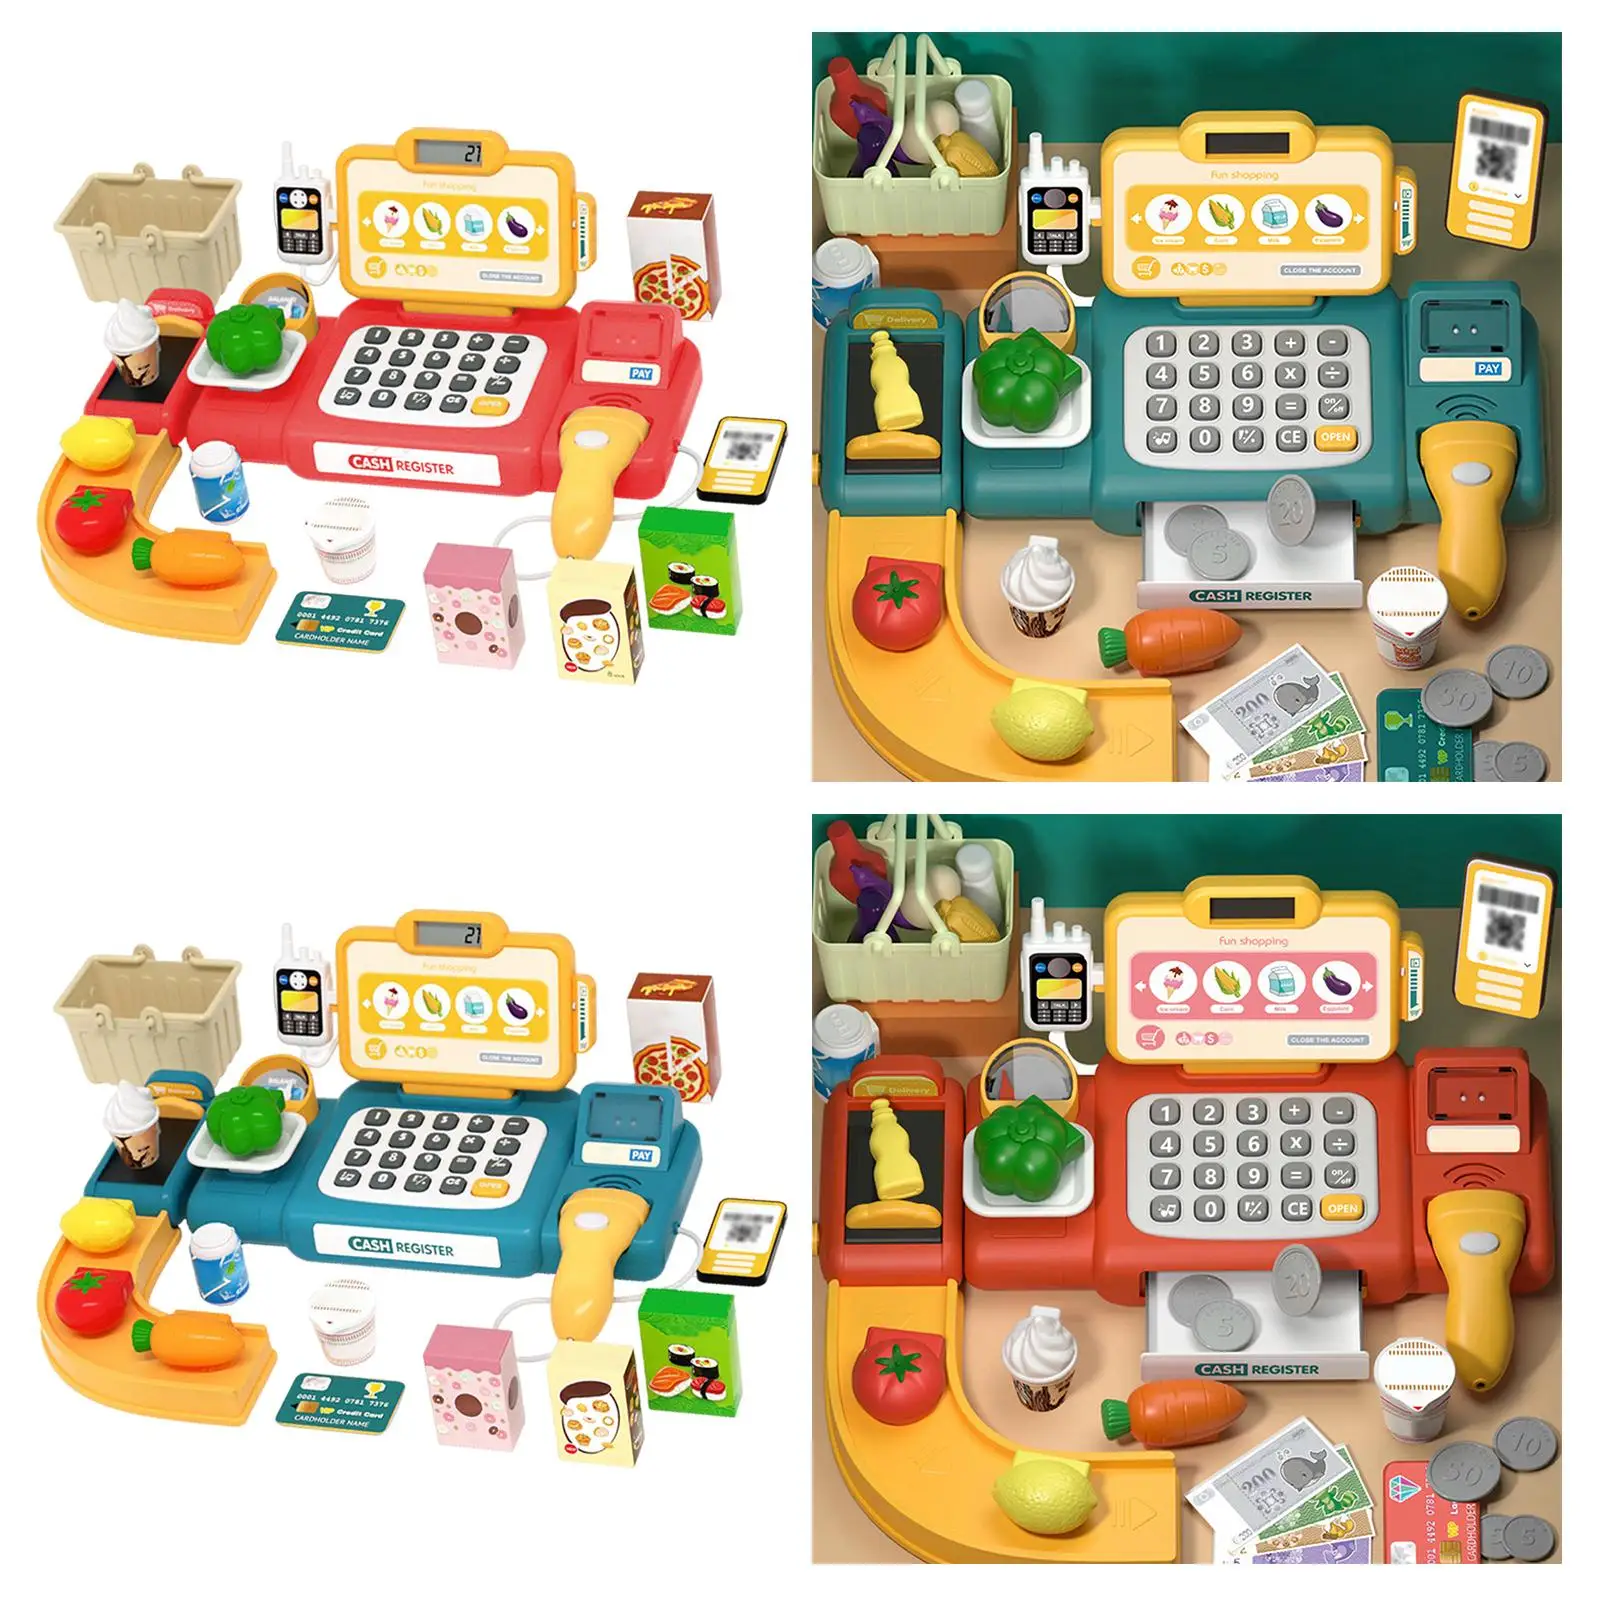 Supermarket Cashier Toy Realistic Educational Grocery Supermarket Playset for Role Play Activity Interaction Play Store